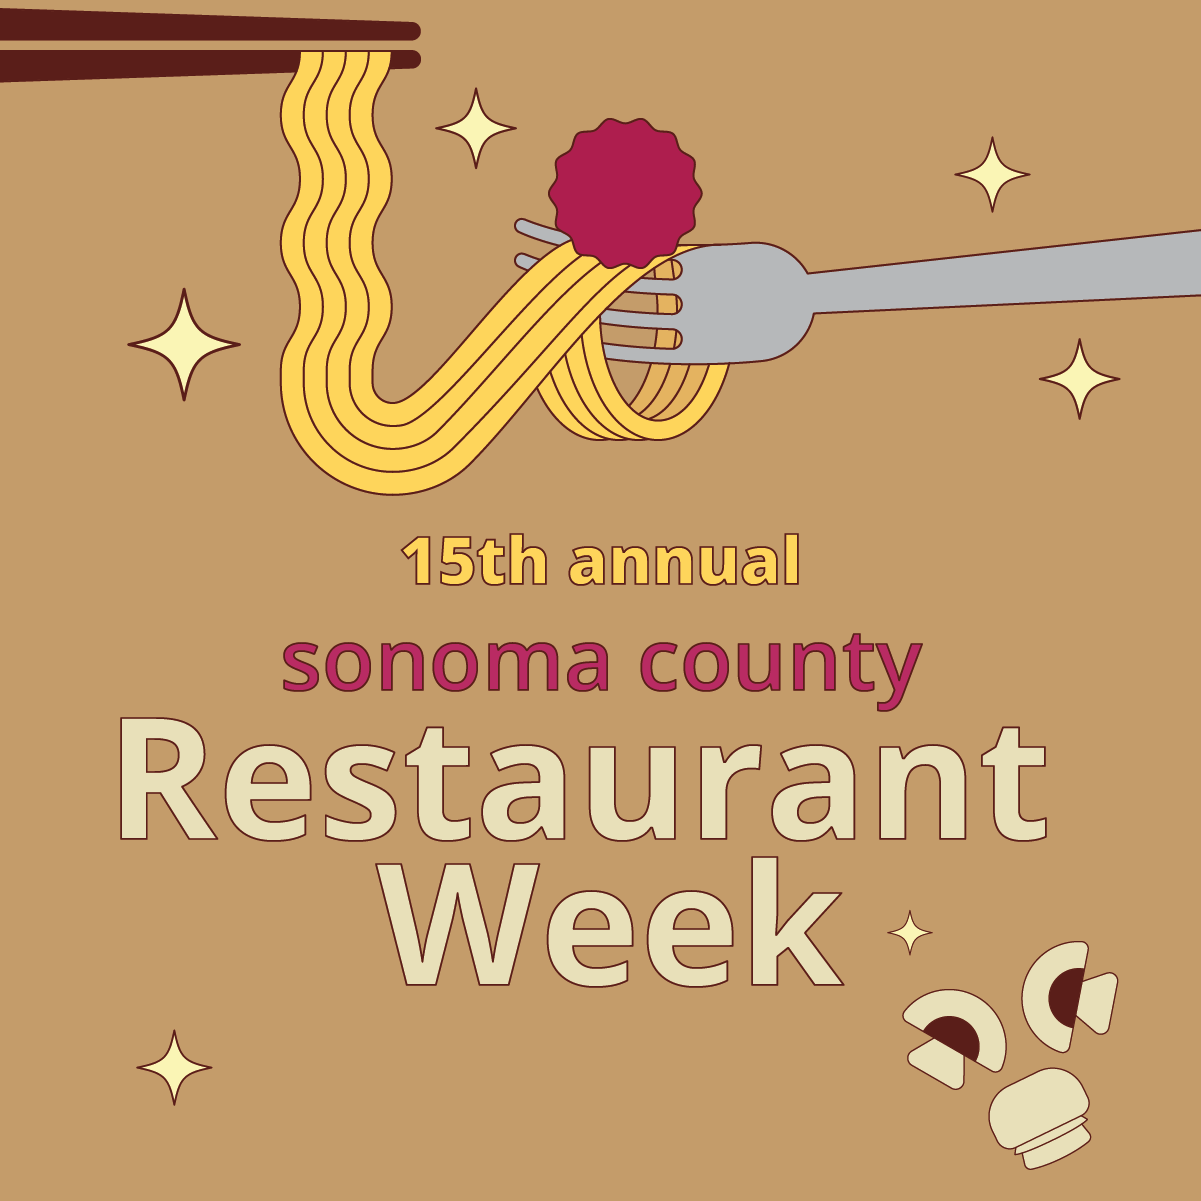 Make the Most of Restaurant Week